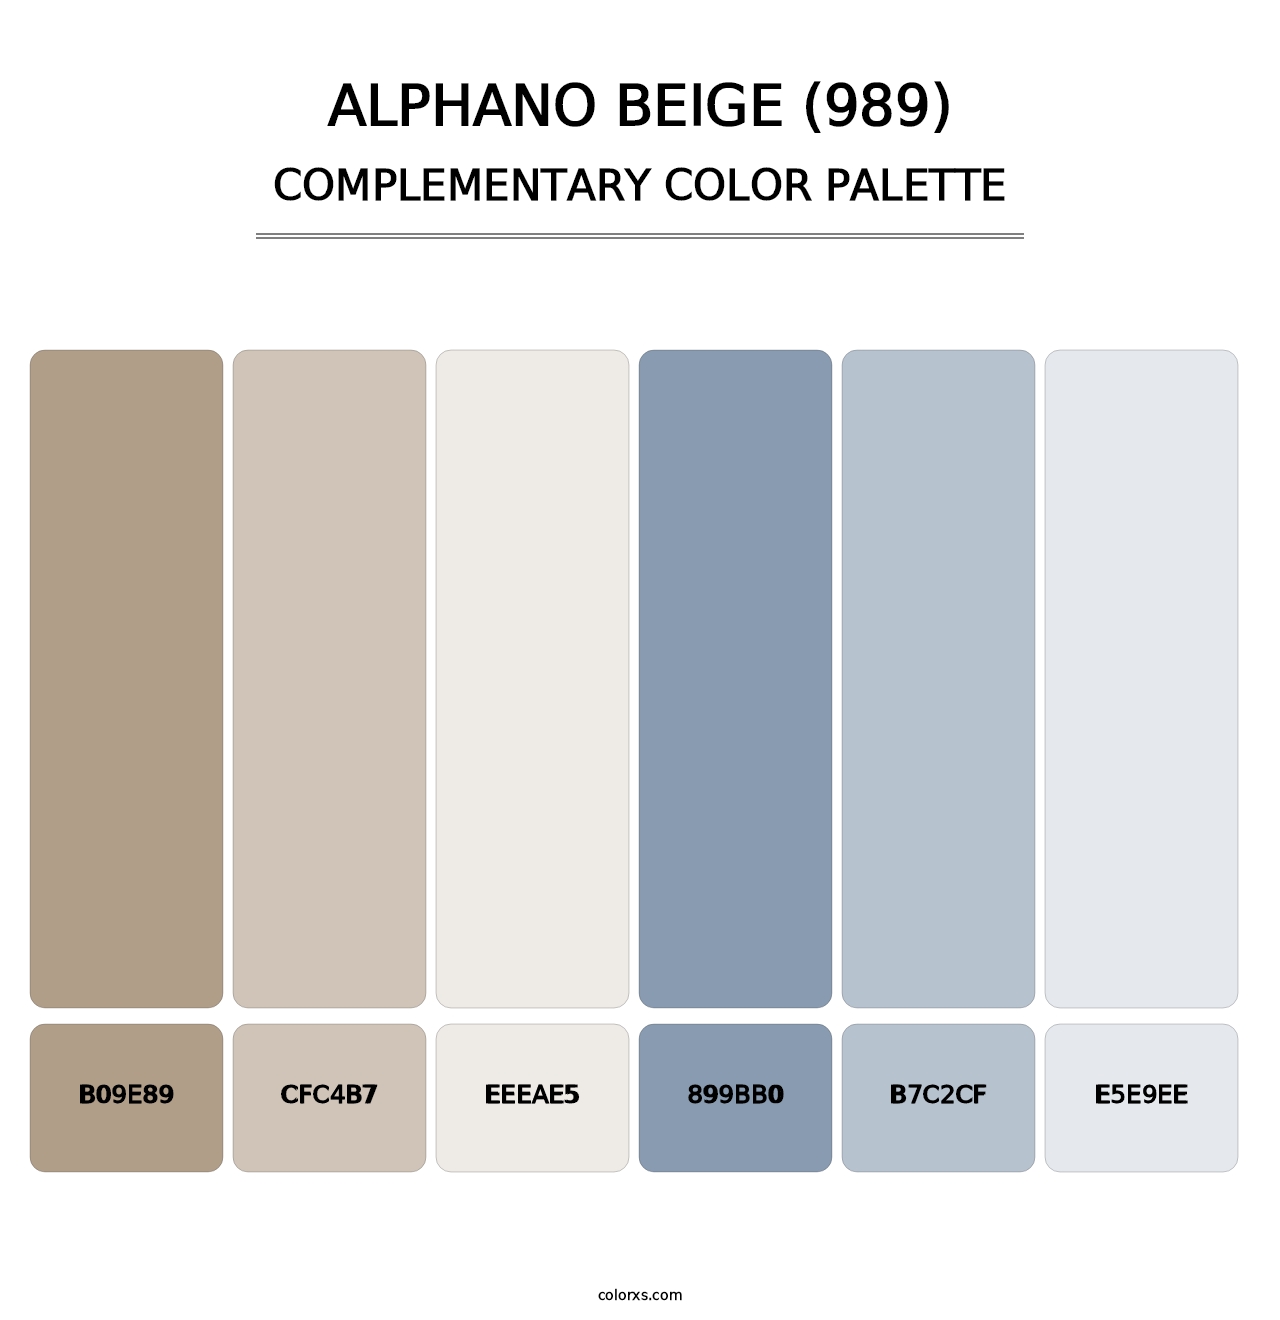 Alphano Beige (989) - Complementary Color Palette